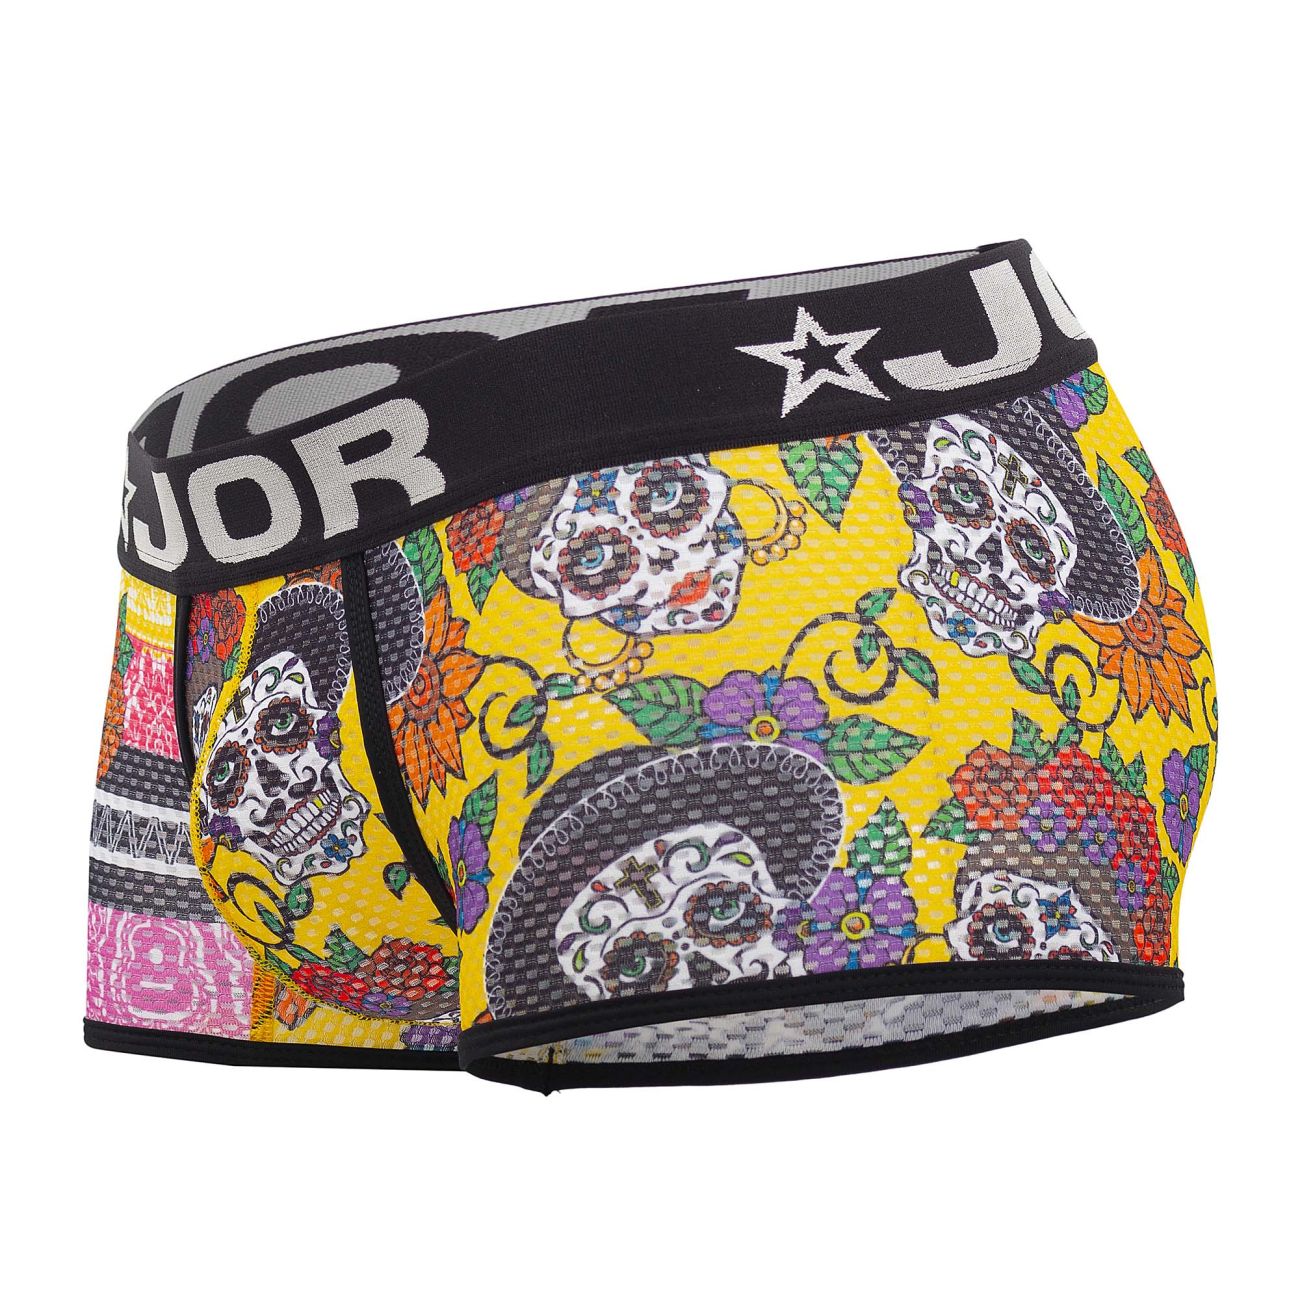 JOR 1648 Guadalupe Trunks Day of the Dead Printed